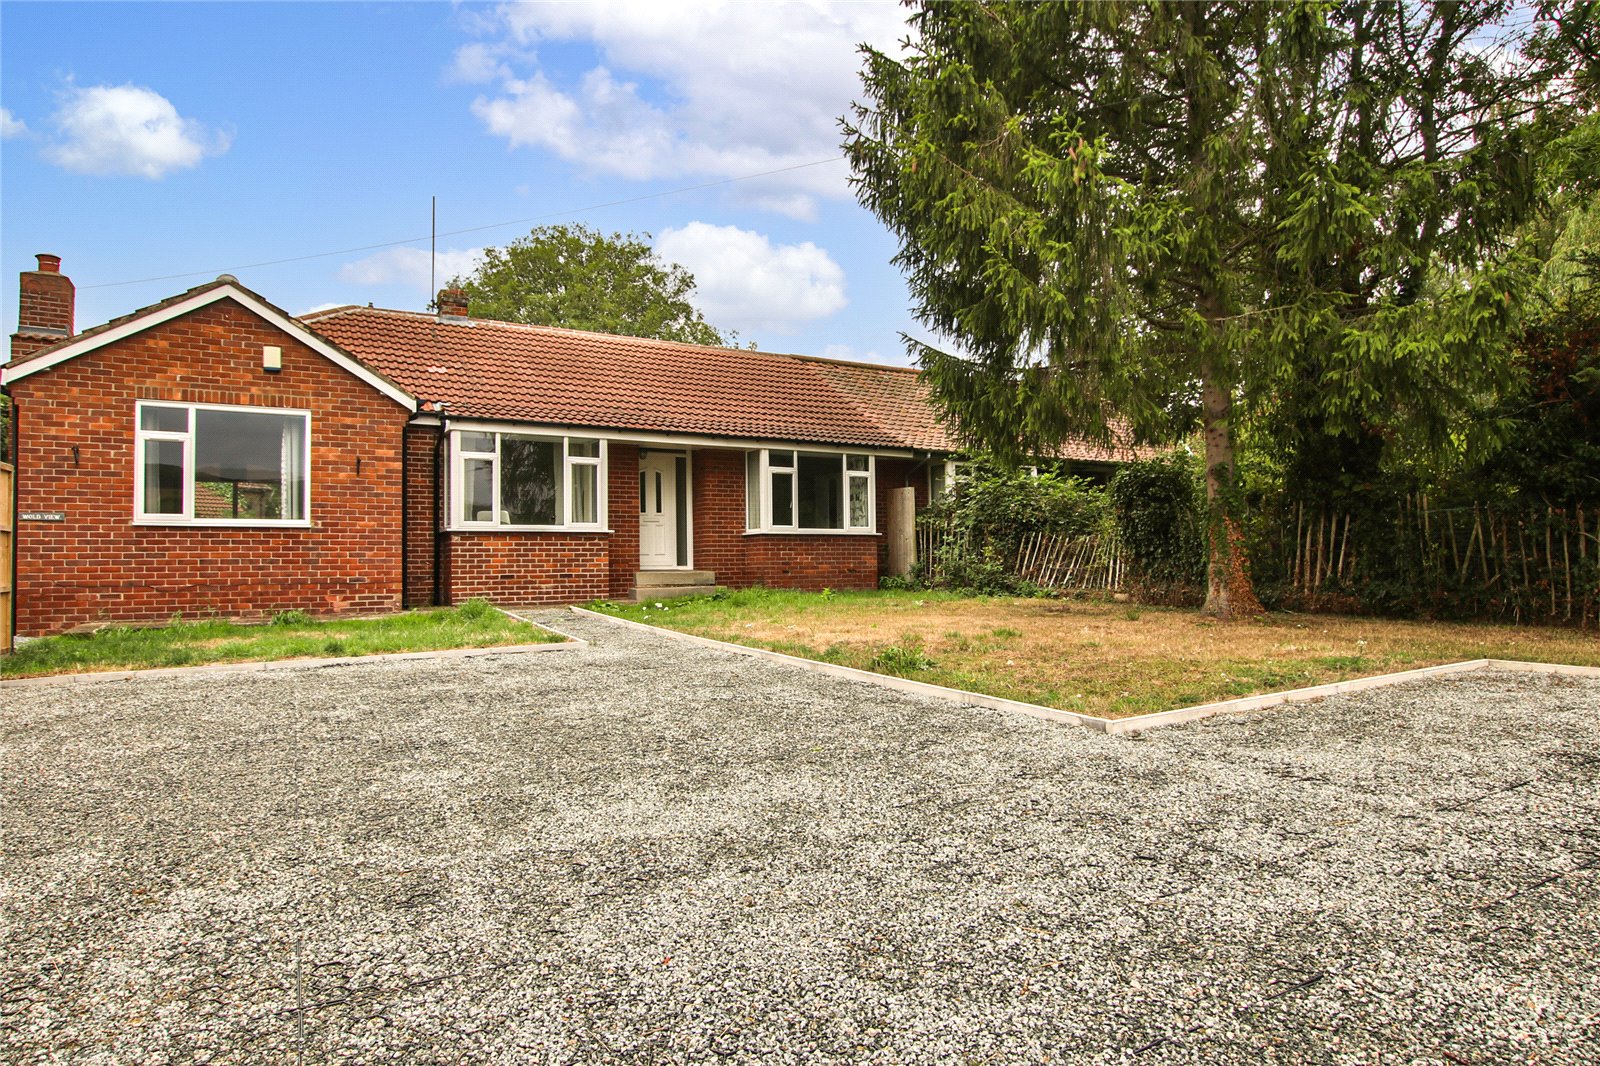 3 bed bungalow for sale in Little Wold Lane, South Cave, HU15